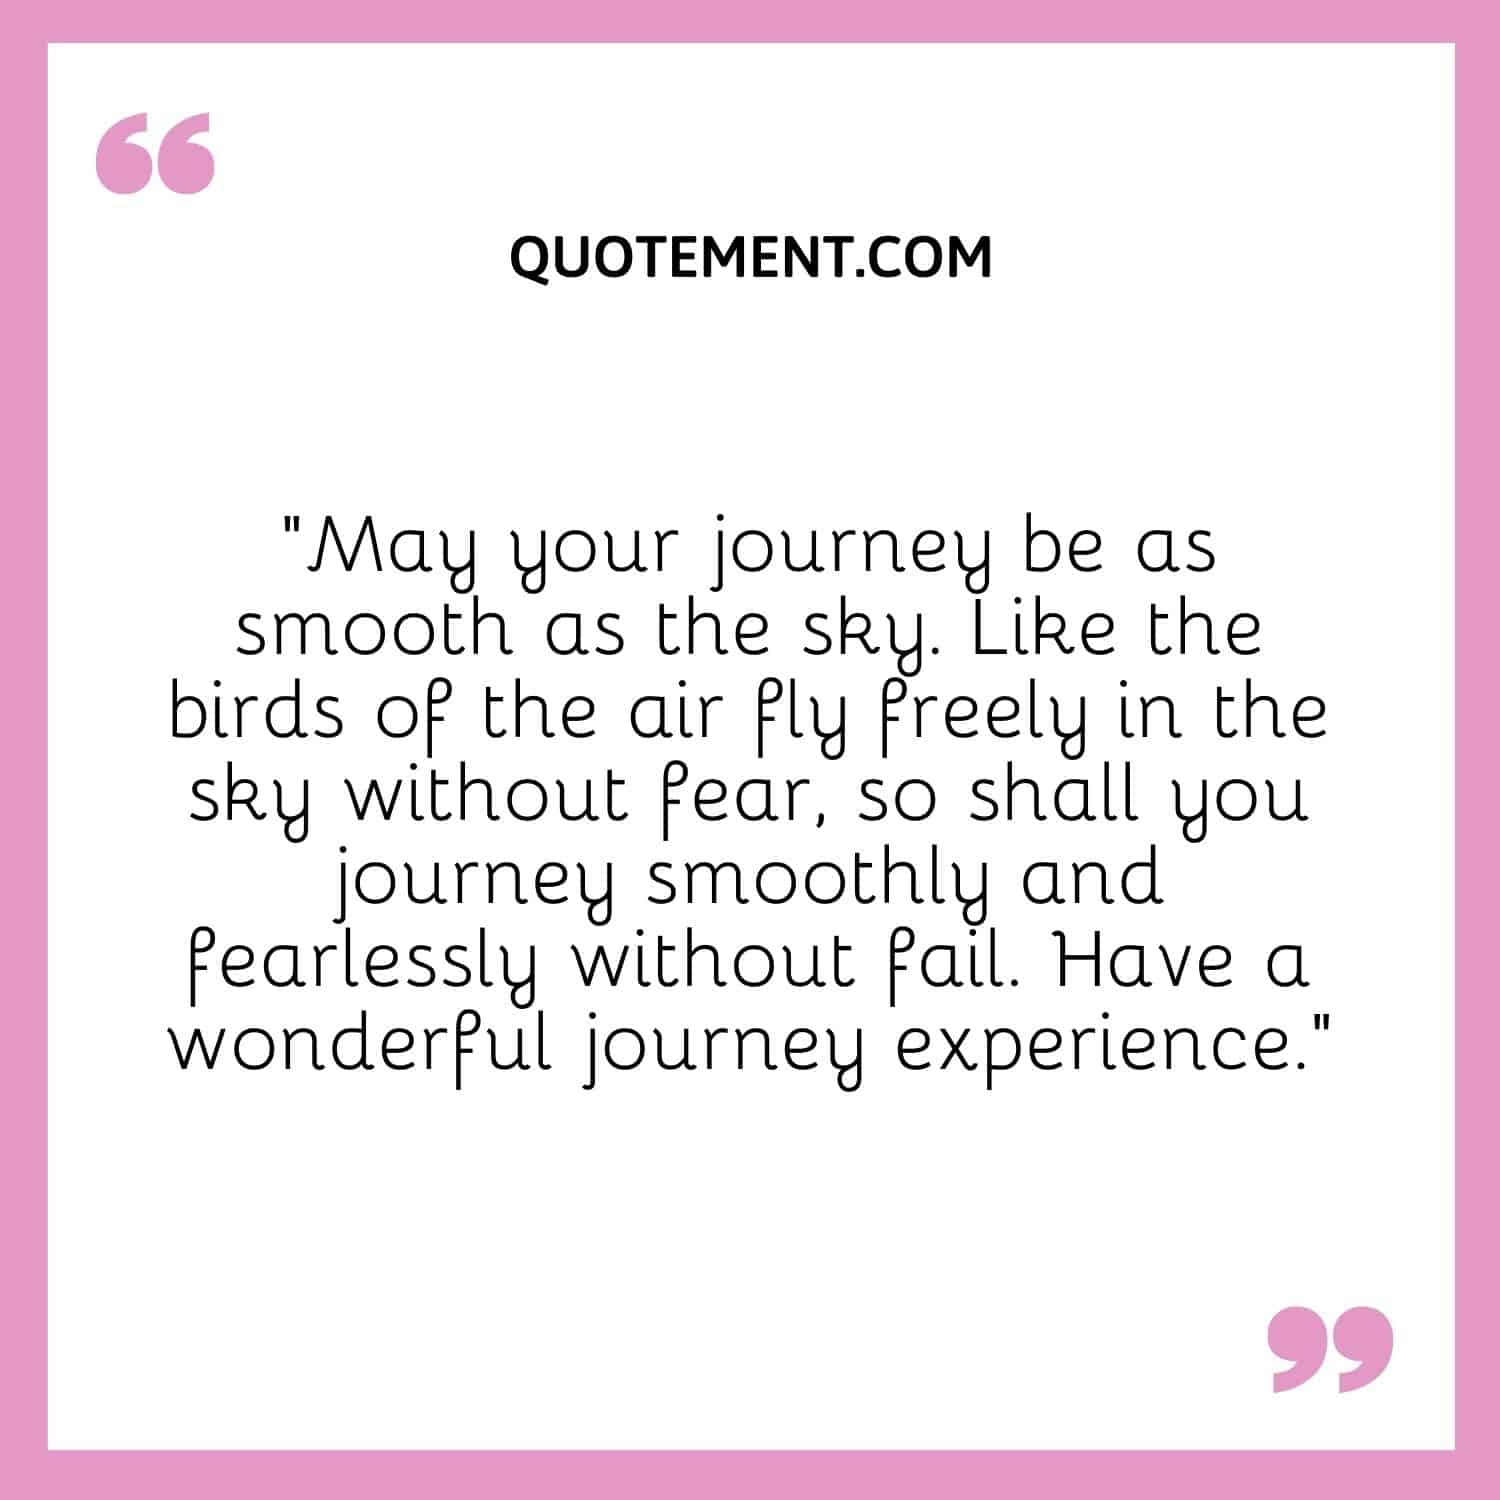 May your journey be as smooth as the sky. Like the birds of the air fly freely in the sky without fear, so shall you journey smoothly and fearlessly without fail. Have a wonderful journey experience.